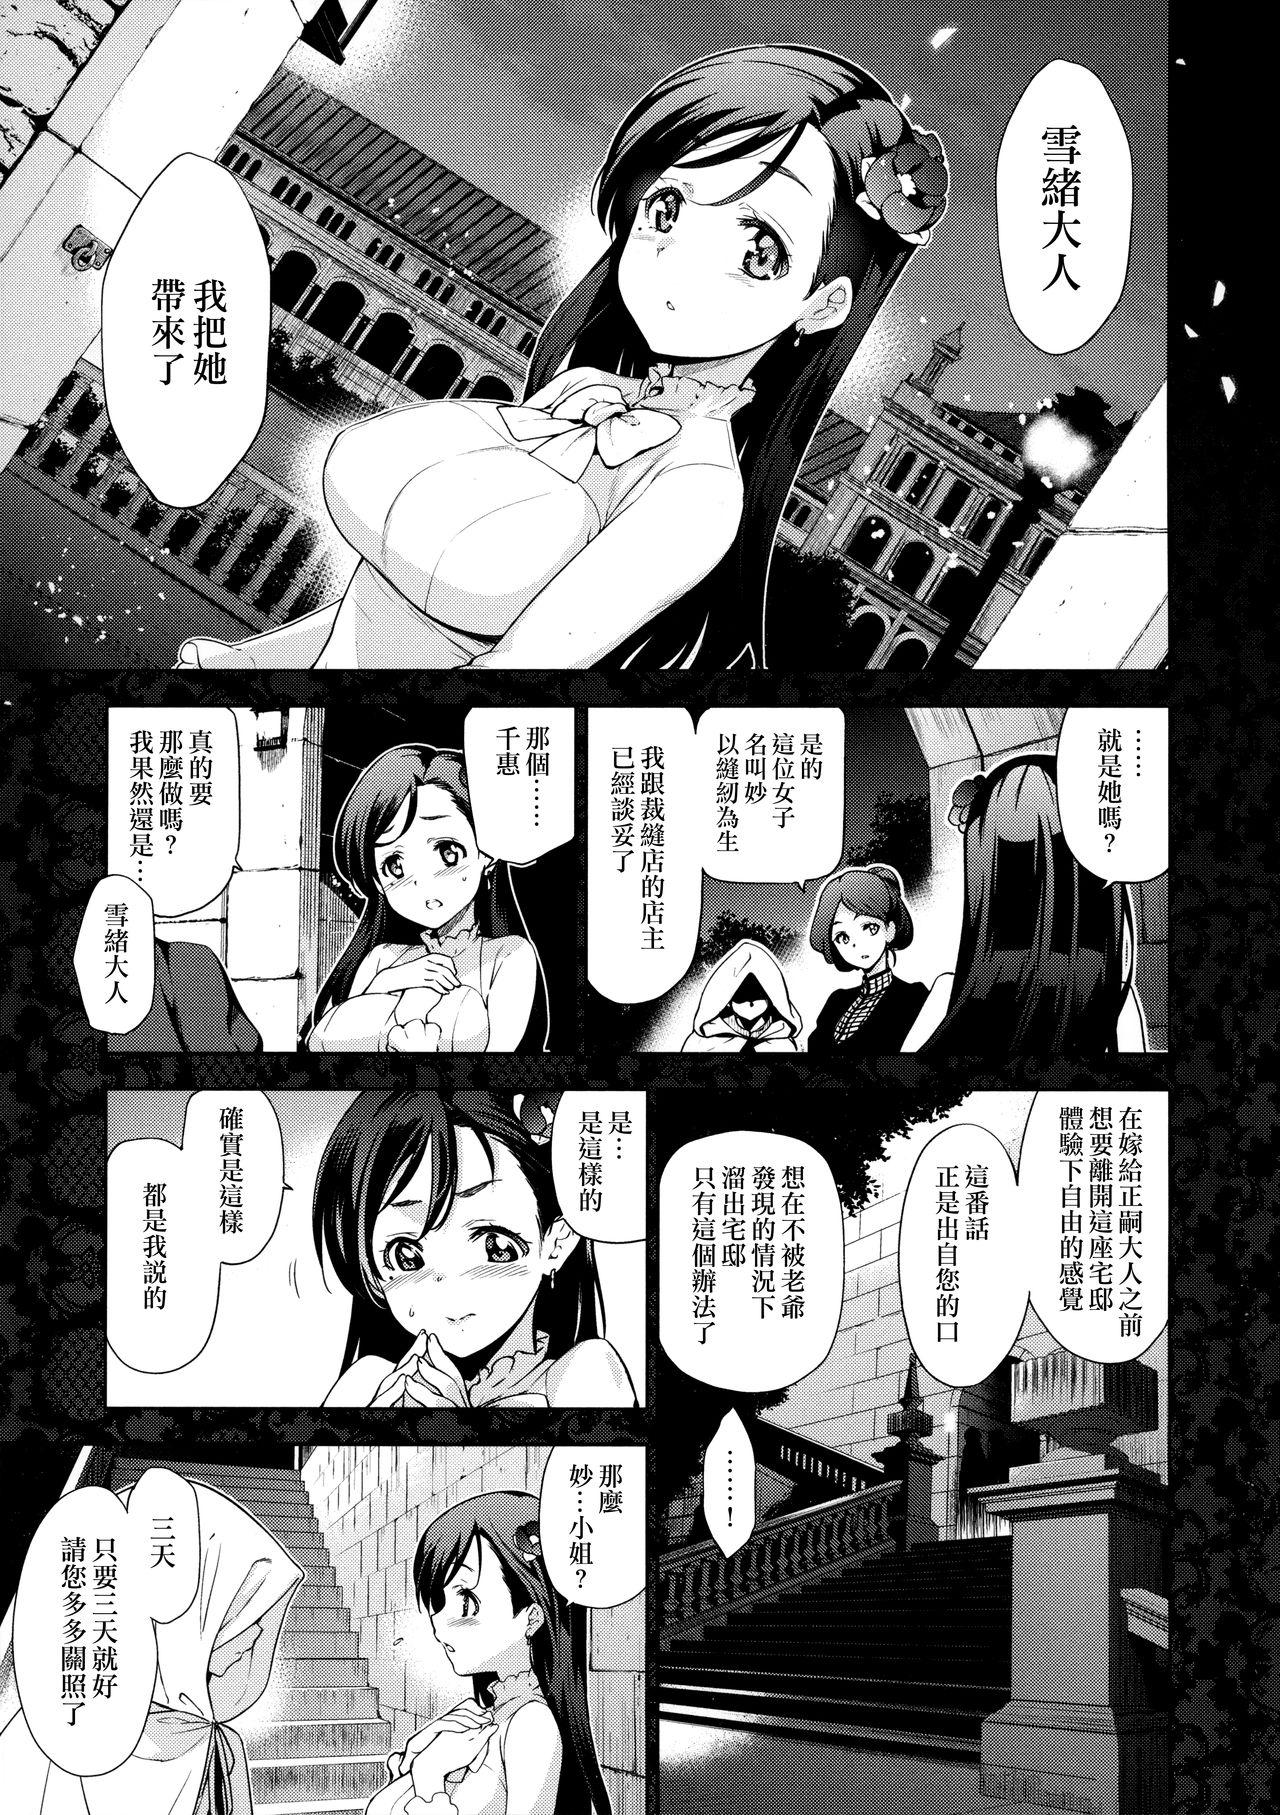 Pick Up [Inue Shinsuke] Hime-sama Otoshi - Fallen Princesses Ch. 1-6 [Chinese] [無邪気漢化組] Best Blow Jobs Ever - Page 3